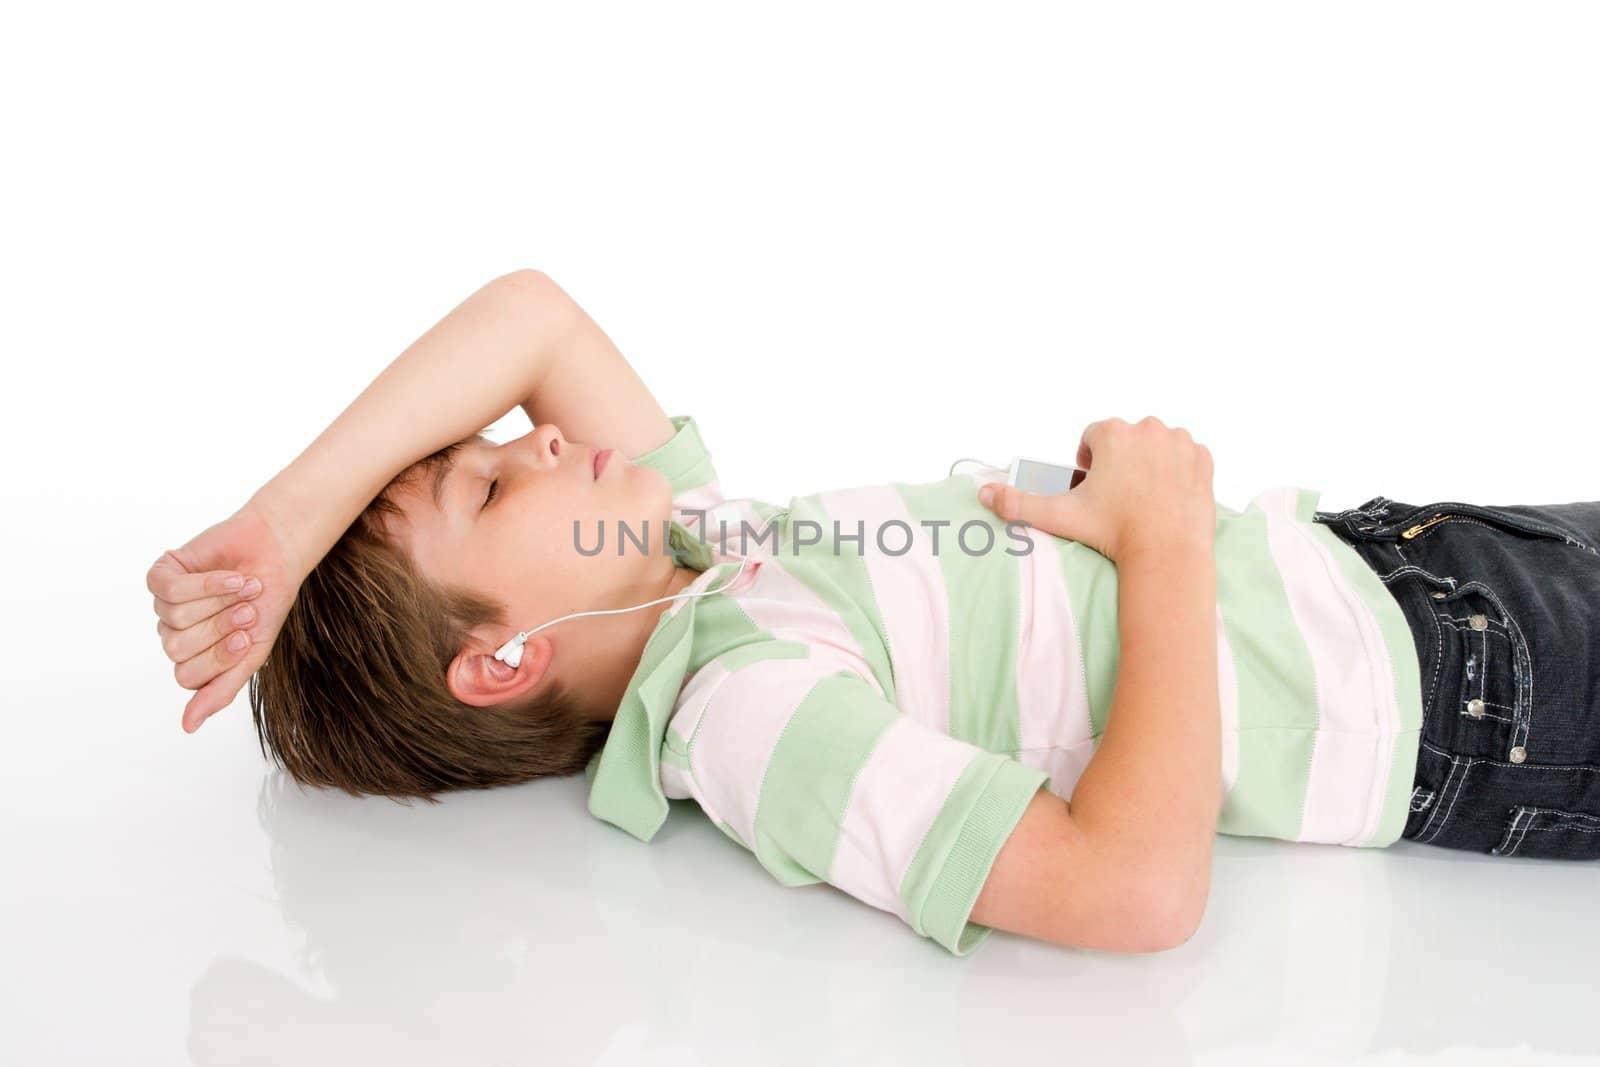 A young boy lying down listening to music on a digital portable mp3 player.